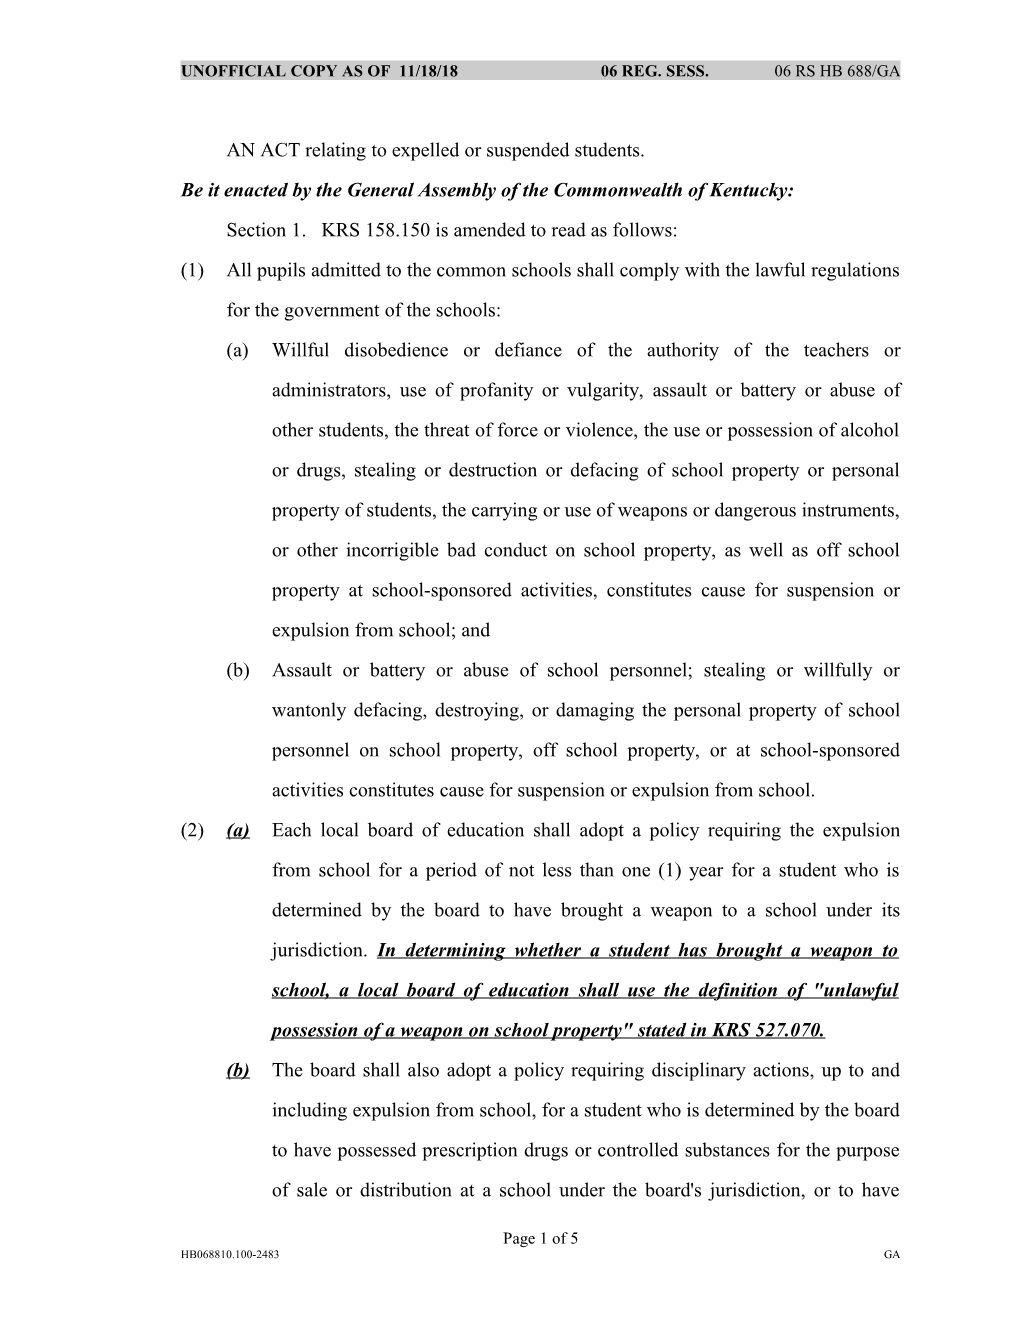 AN ACT Relating to Expelled Or Suspended Students